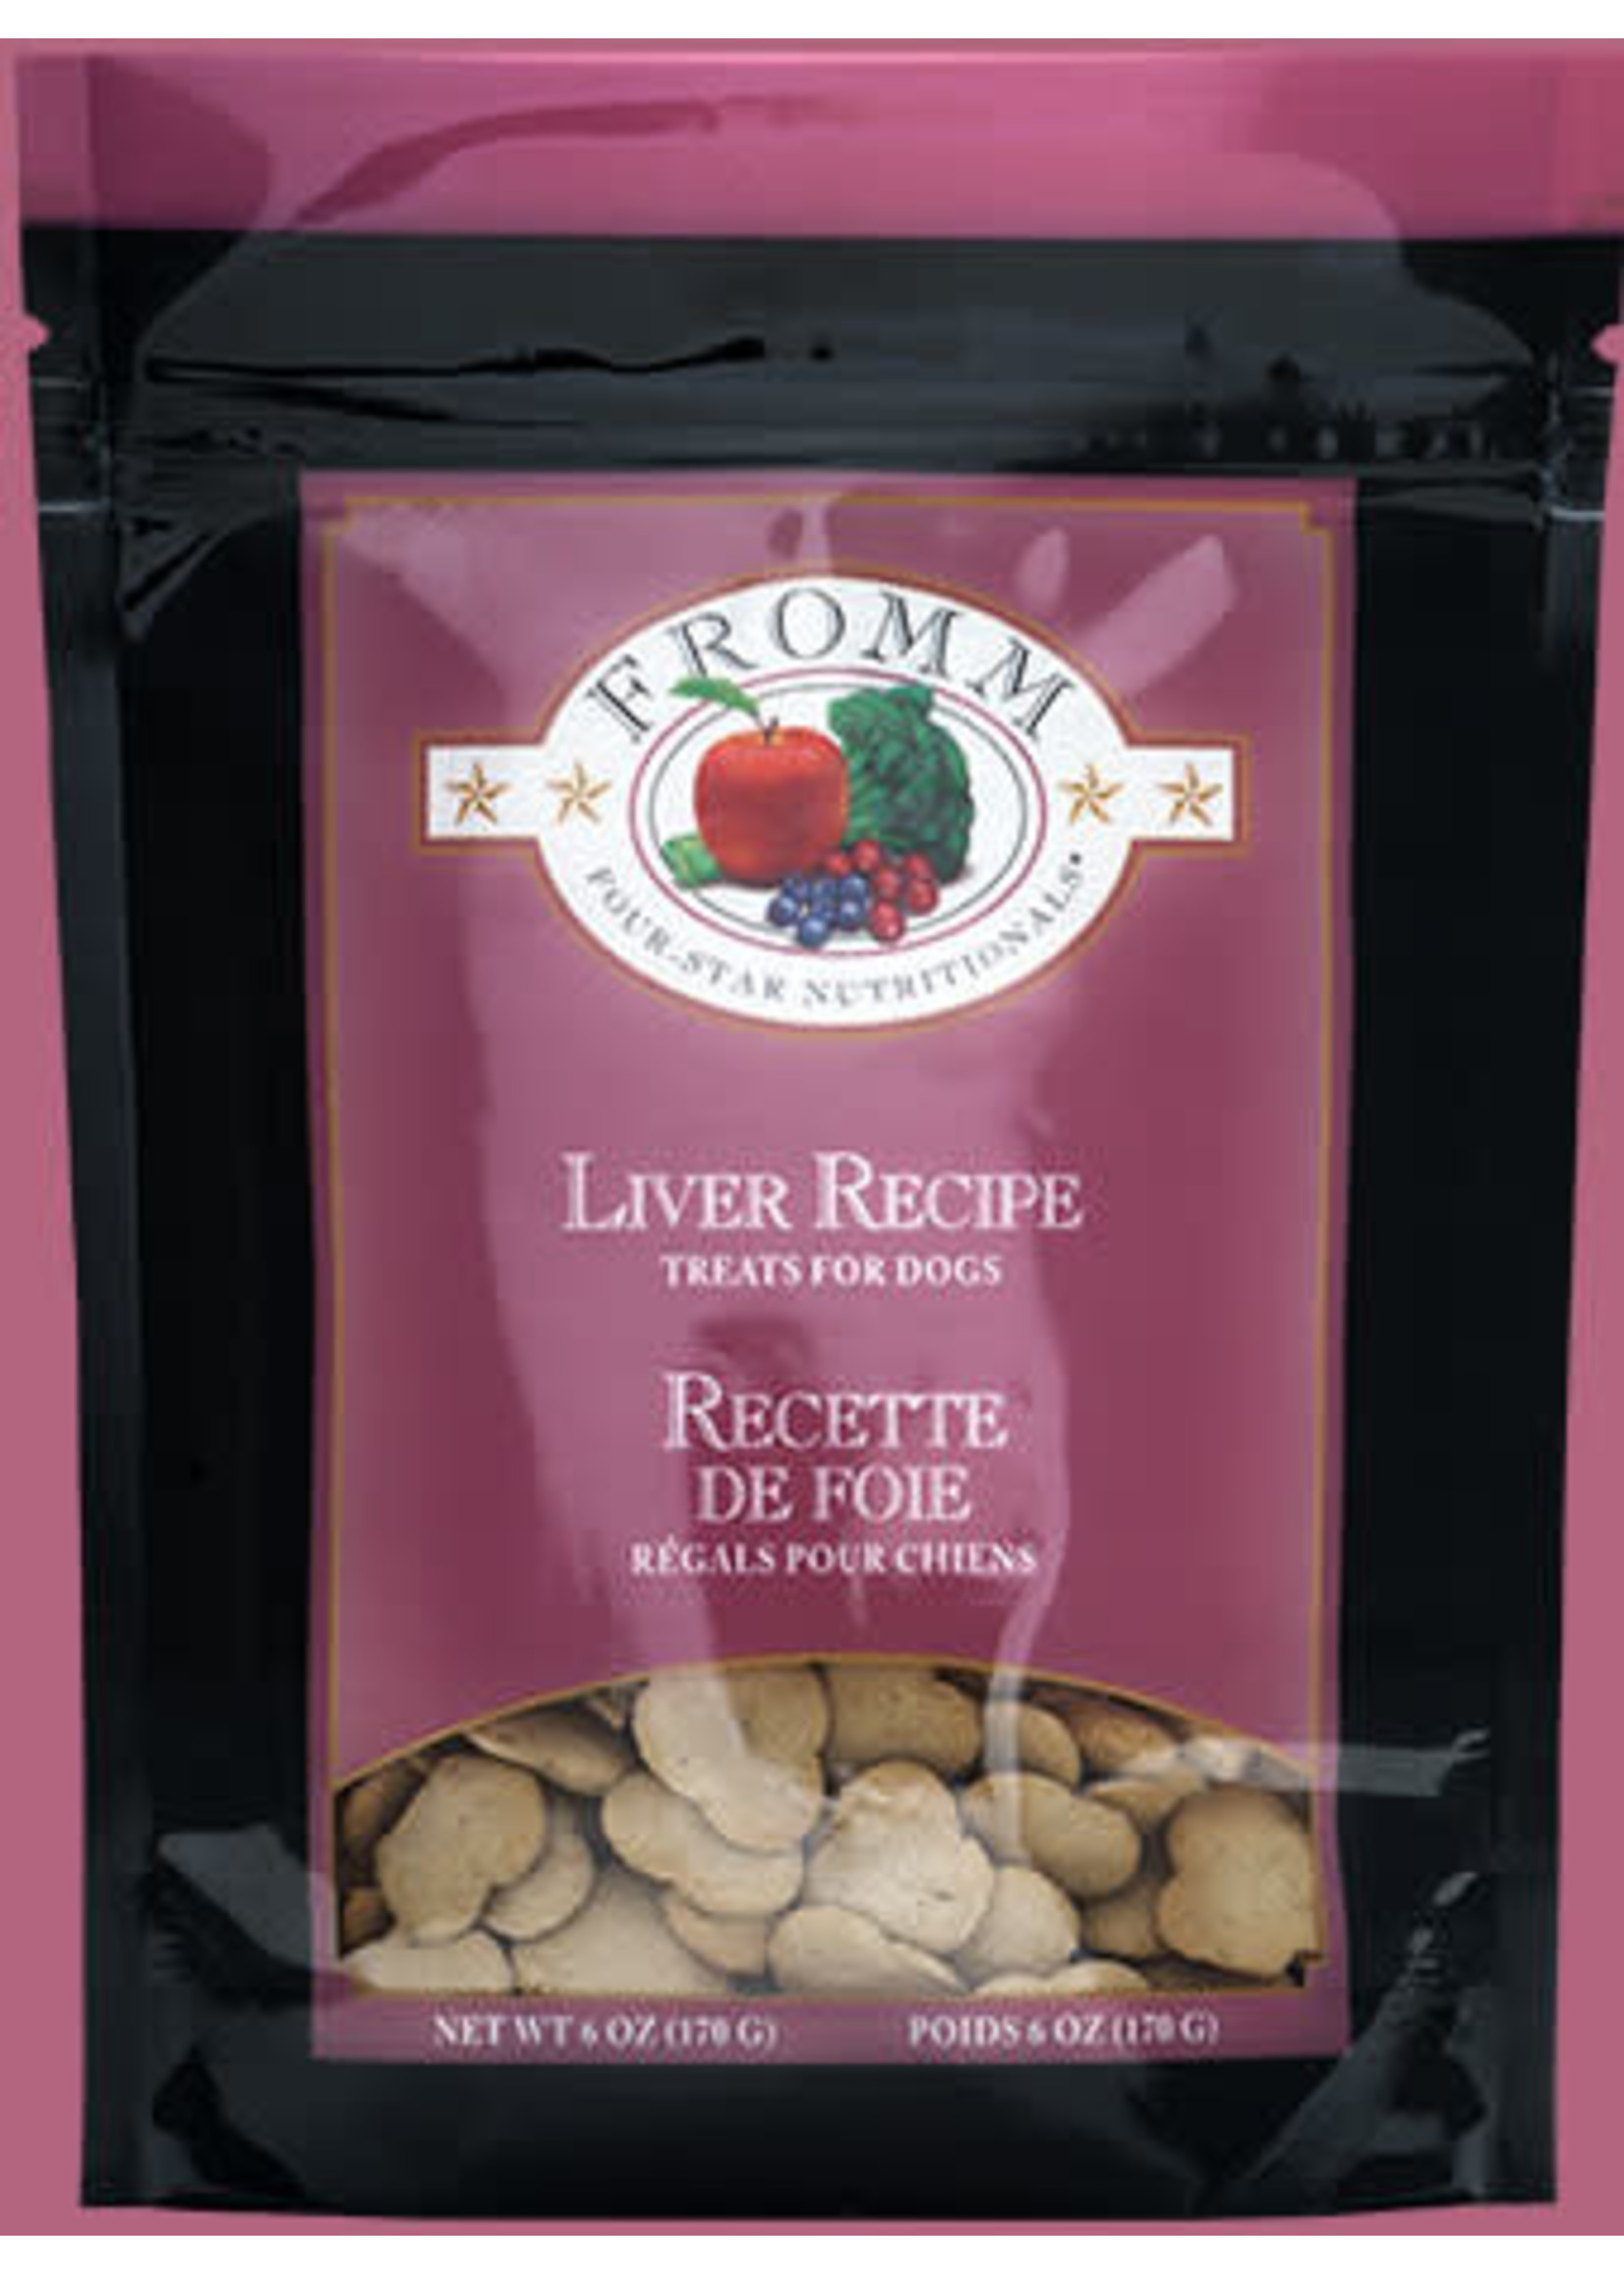 Fromm Family 4 Star Treat Liver 6 oz